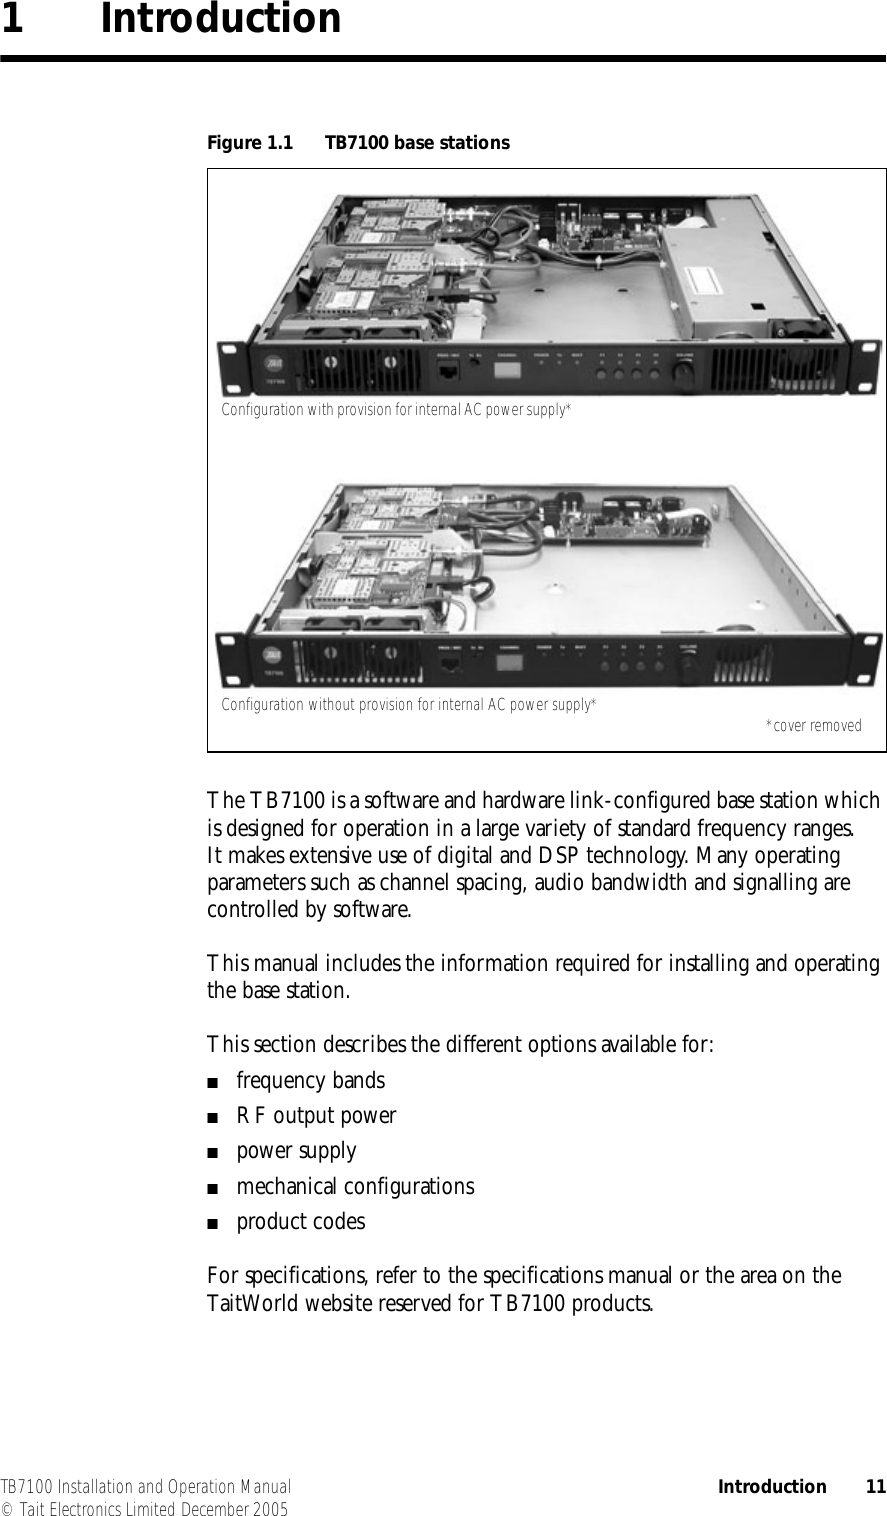  TB7100 Installation and Operation Manual Introduction 11© Tait Electronics Limited December 20051IntroductionThe TB7100 is a software and hardware link-configured base station which is designed for operation in a large variety of standard frequency ranges. It makes extensive use of digital and DSP technology. Many operating parameters such as channel spacing, audio bandwidth and signalling are controlled by software.This manual includes the information required for installing and operating the base station.This section describes the different options available for:■frequency bands■RF output power■power supply■mechanical configurations■product codesFor specifications, refer to the specifications manual or the area on the TaitWorld website reserved for TB7100 products.Figure 1.1 TB7100 base stationsConfiguration with provision for internal AC power supply*Configuration without provision for internal AC power supply* *cover removed